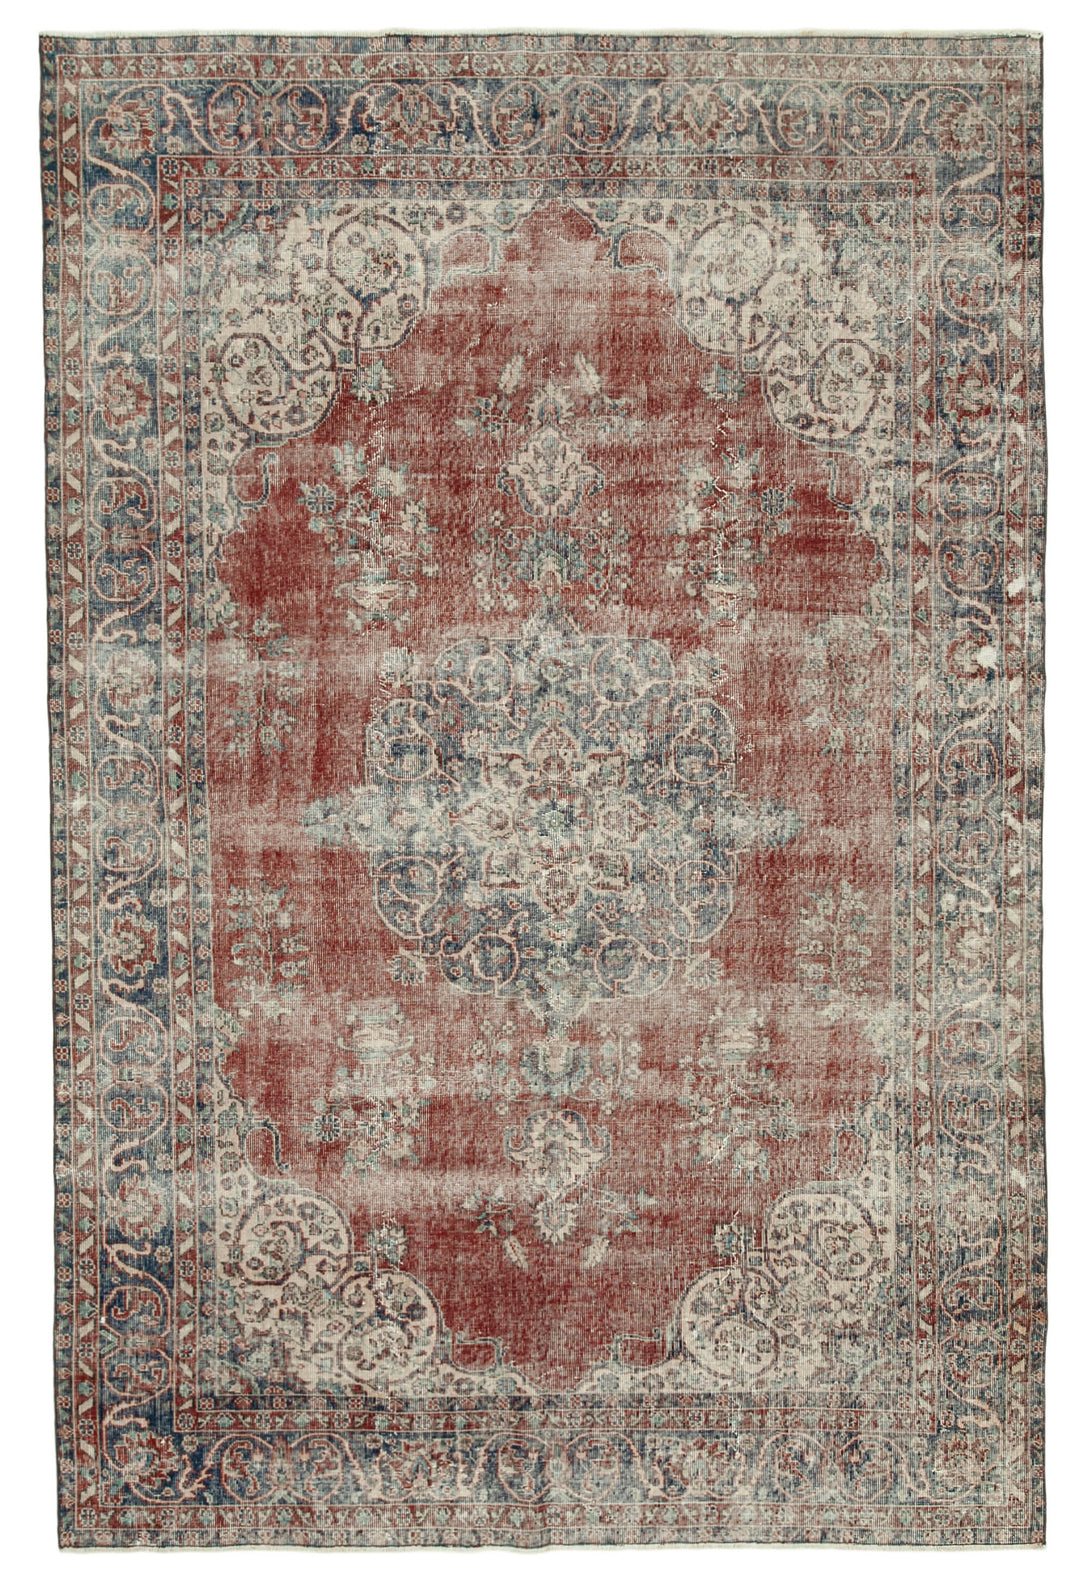 Handmade White Wash Area Rug > Design# OL-AC-36890 > Size: 6'-11" x 10'-7", Carpet Culture Rugs, Handmade Rugs, NYC Rugs, New Rugs, Shop Rugs, Rug Store, Outlet Rugs, SoHo Rugs, Rugs in USA